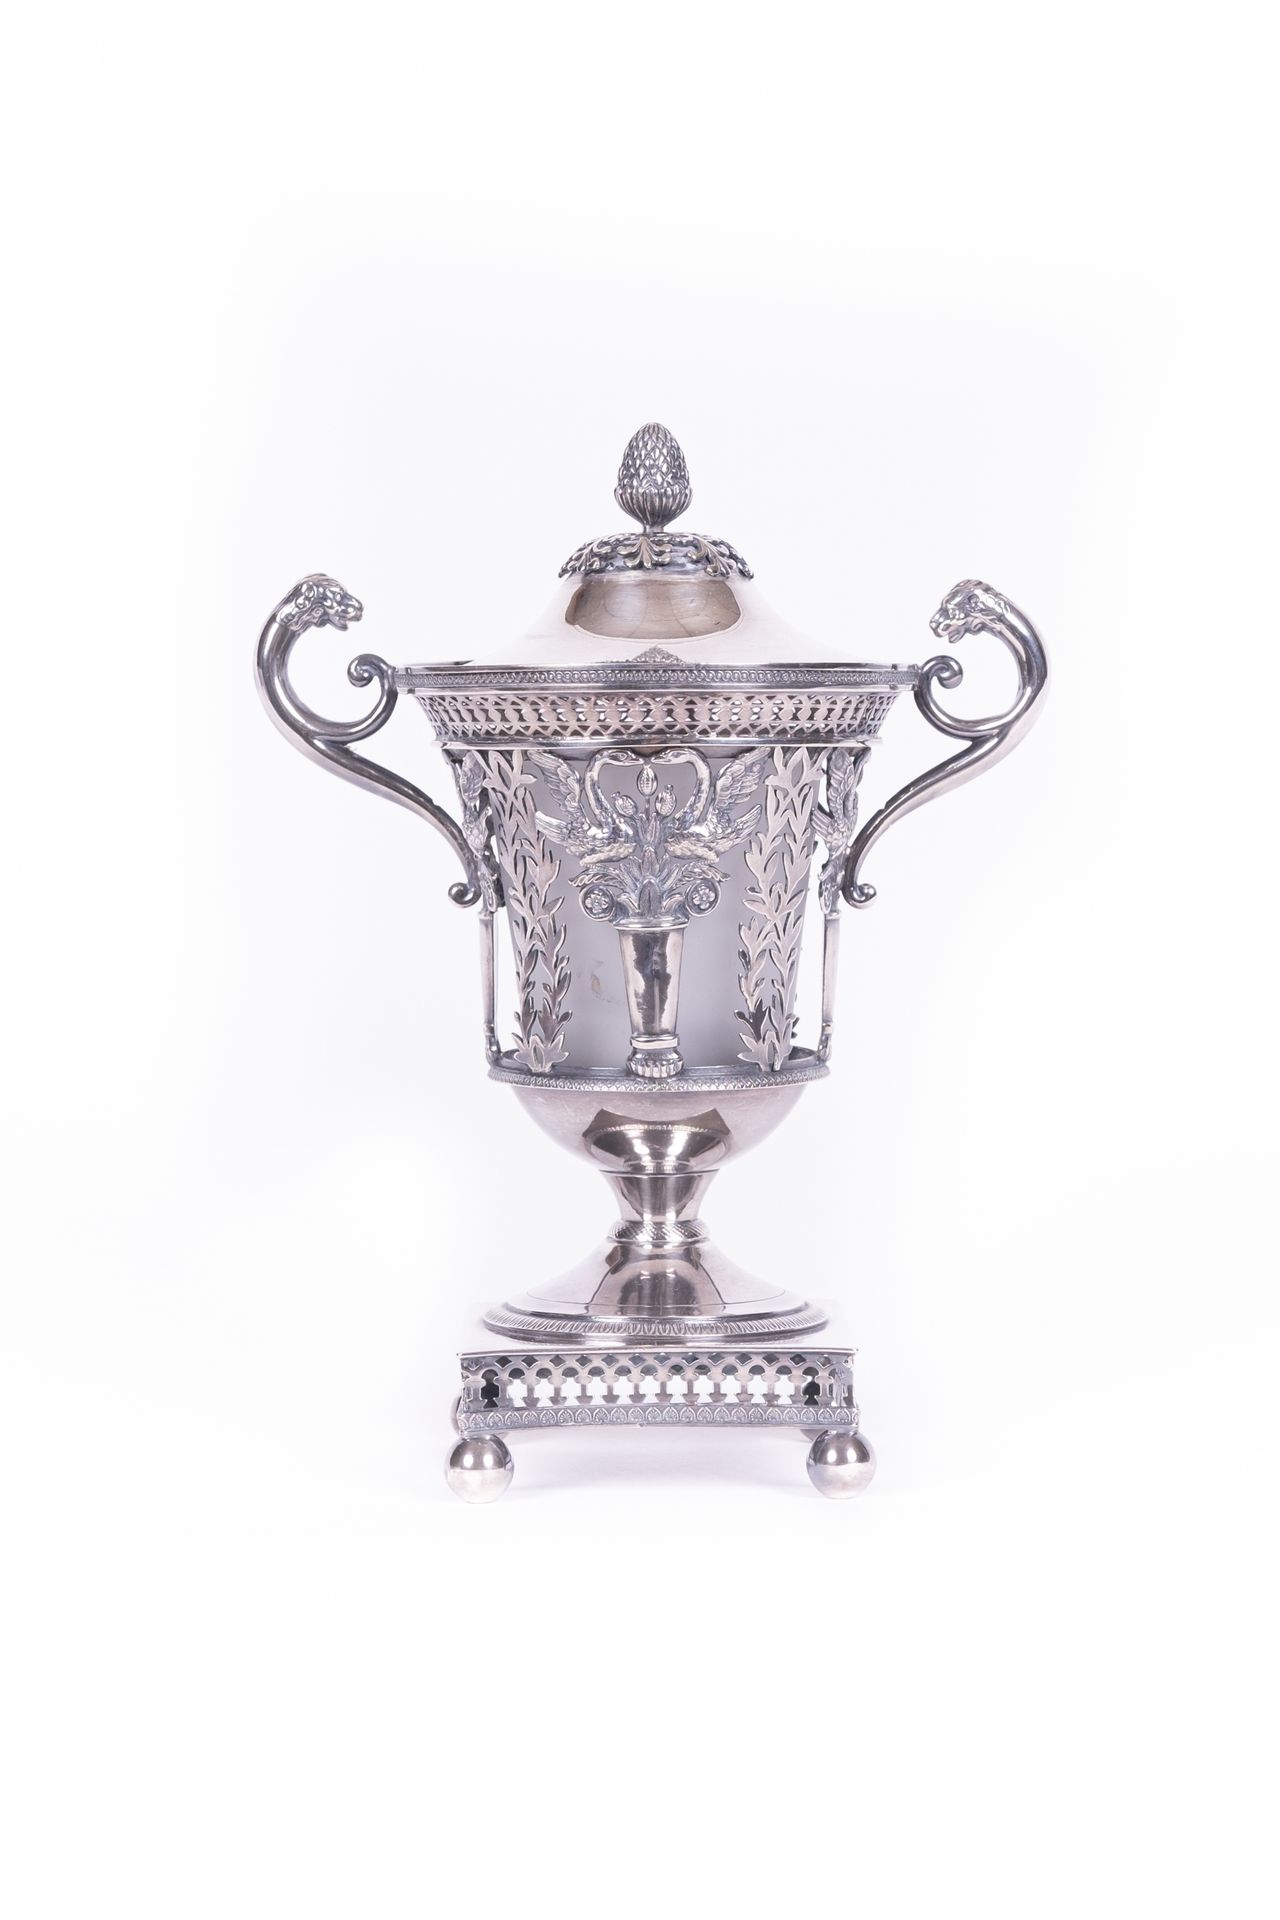 Null Silver jam cupboard 1st title of Medicis form, it rests on a square base wi&hellip;